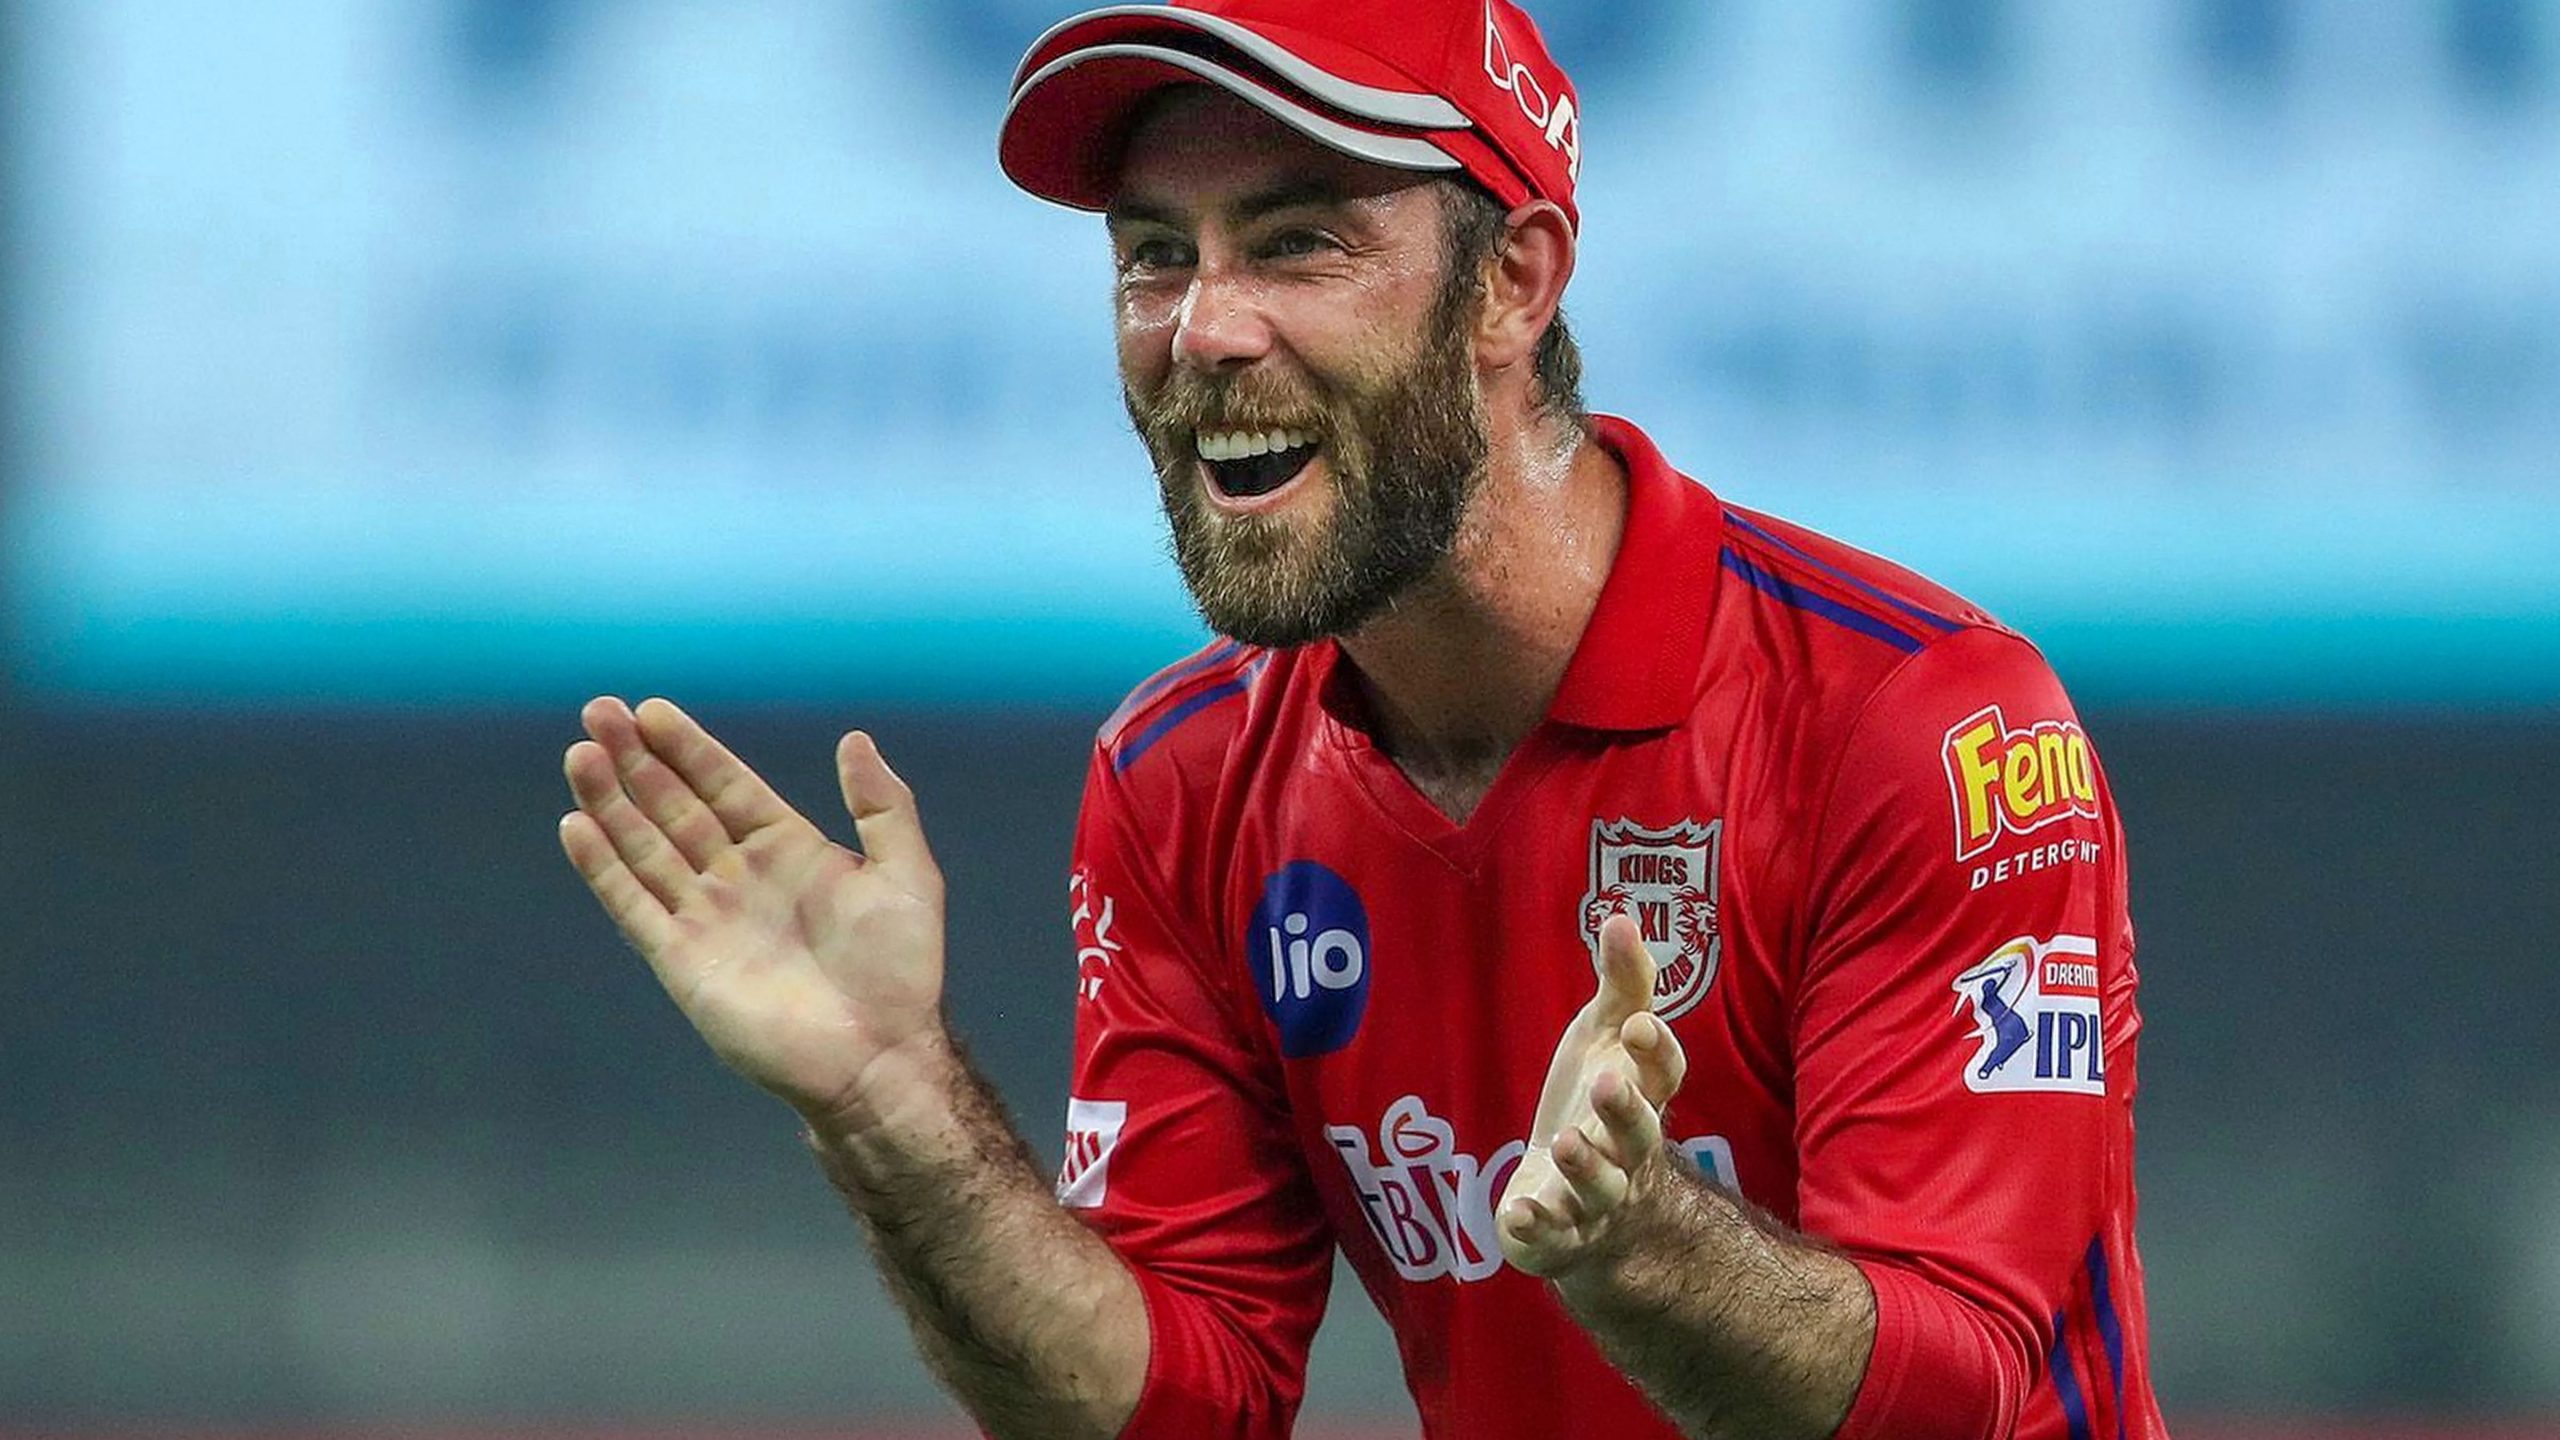 Big ‘pawri’ for Glenn Maxwell: Twitter flooded with memes as he bags Rs 14.25 crores at auction